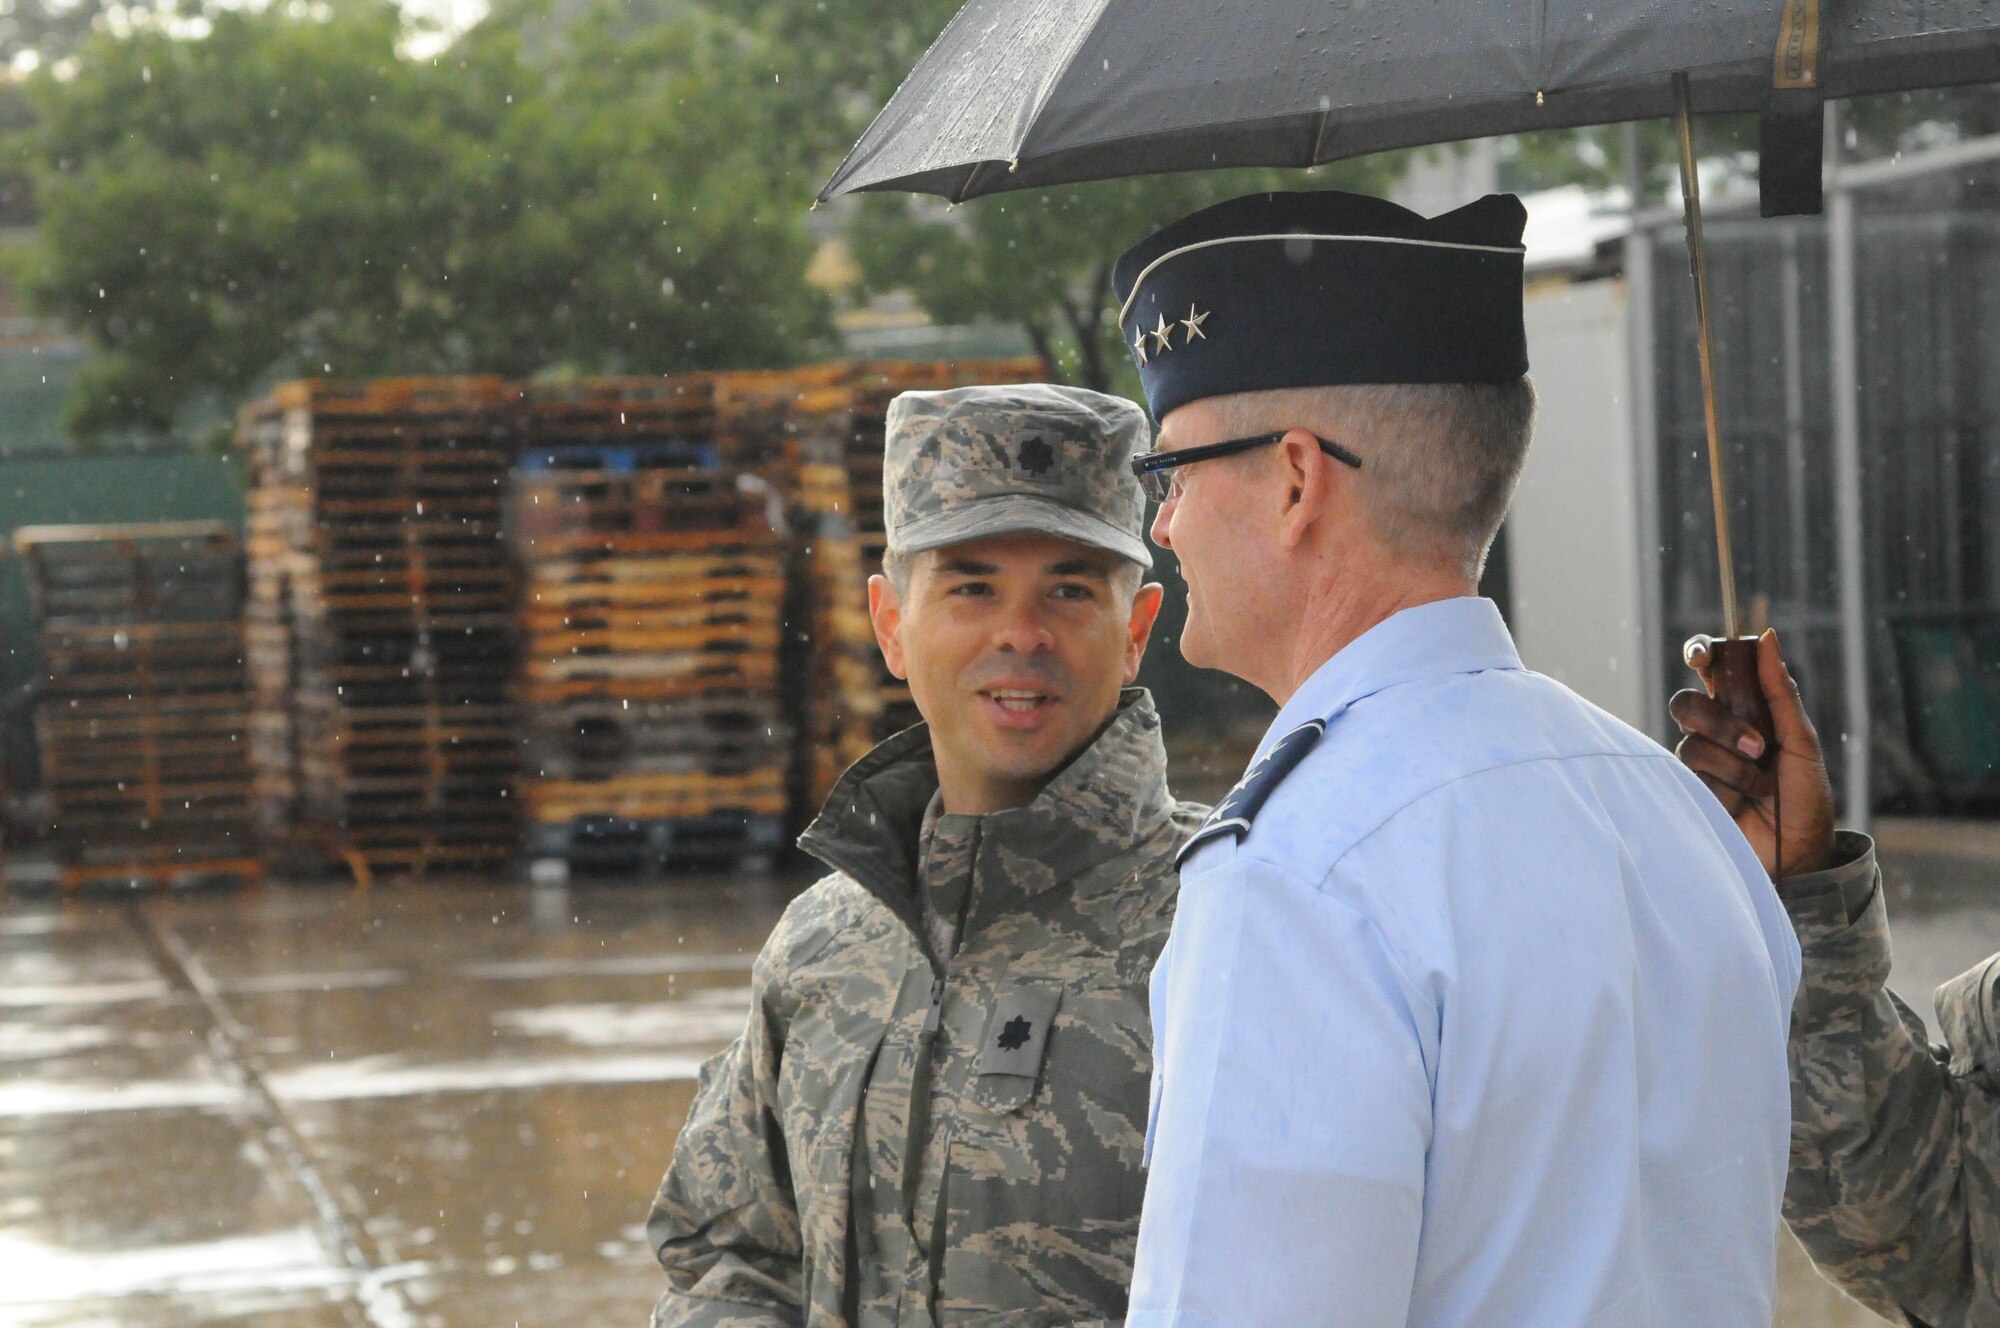 Lt. Col. Manny Cohan, 717th Air Base Squadron commander, speaks with Lt. Gen, Darryl Robertson, 3rd Air Force commander Aug. 19, 2014, Ankara, Turkey. The 717th ABS is one of two geographically-separated units under the 39th Air Base Wing. (courtesy photo)